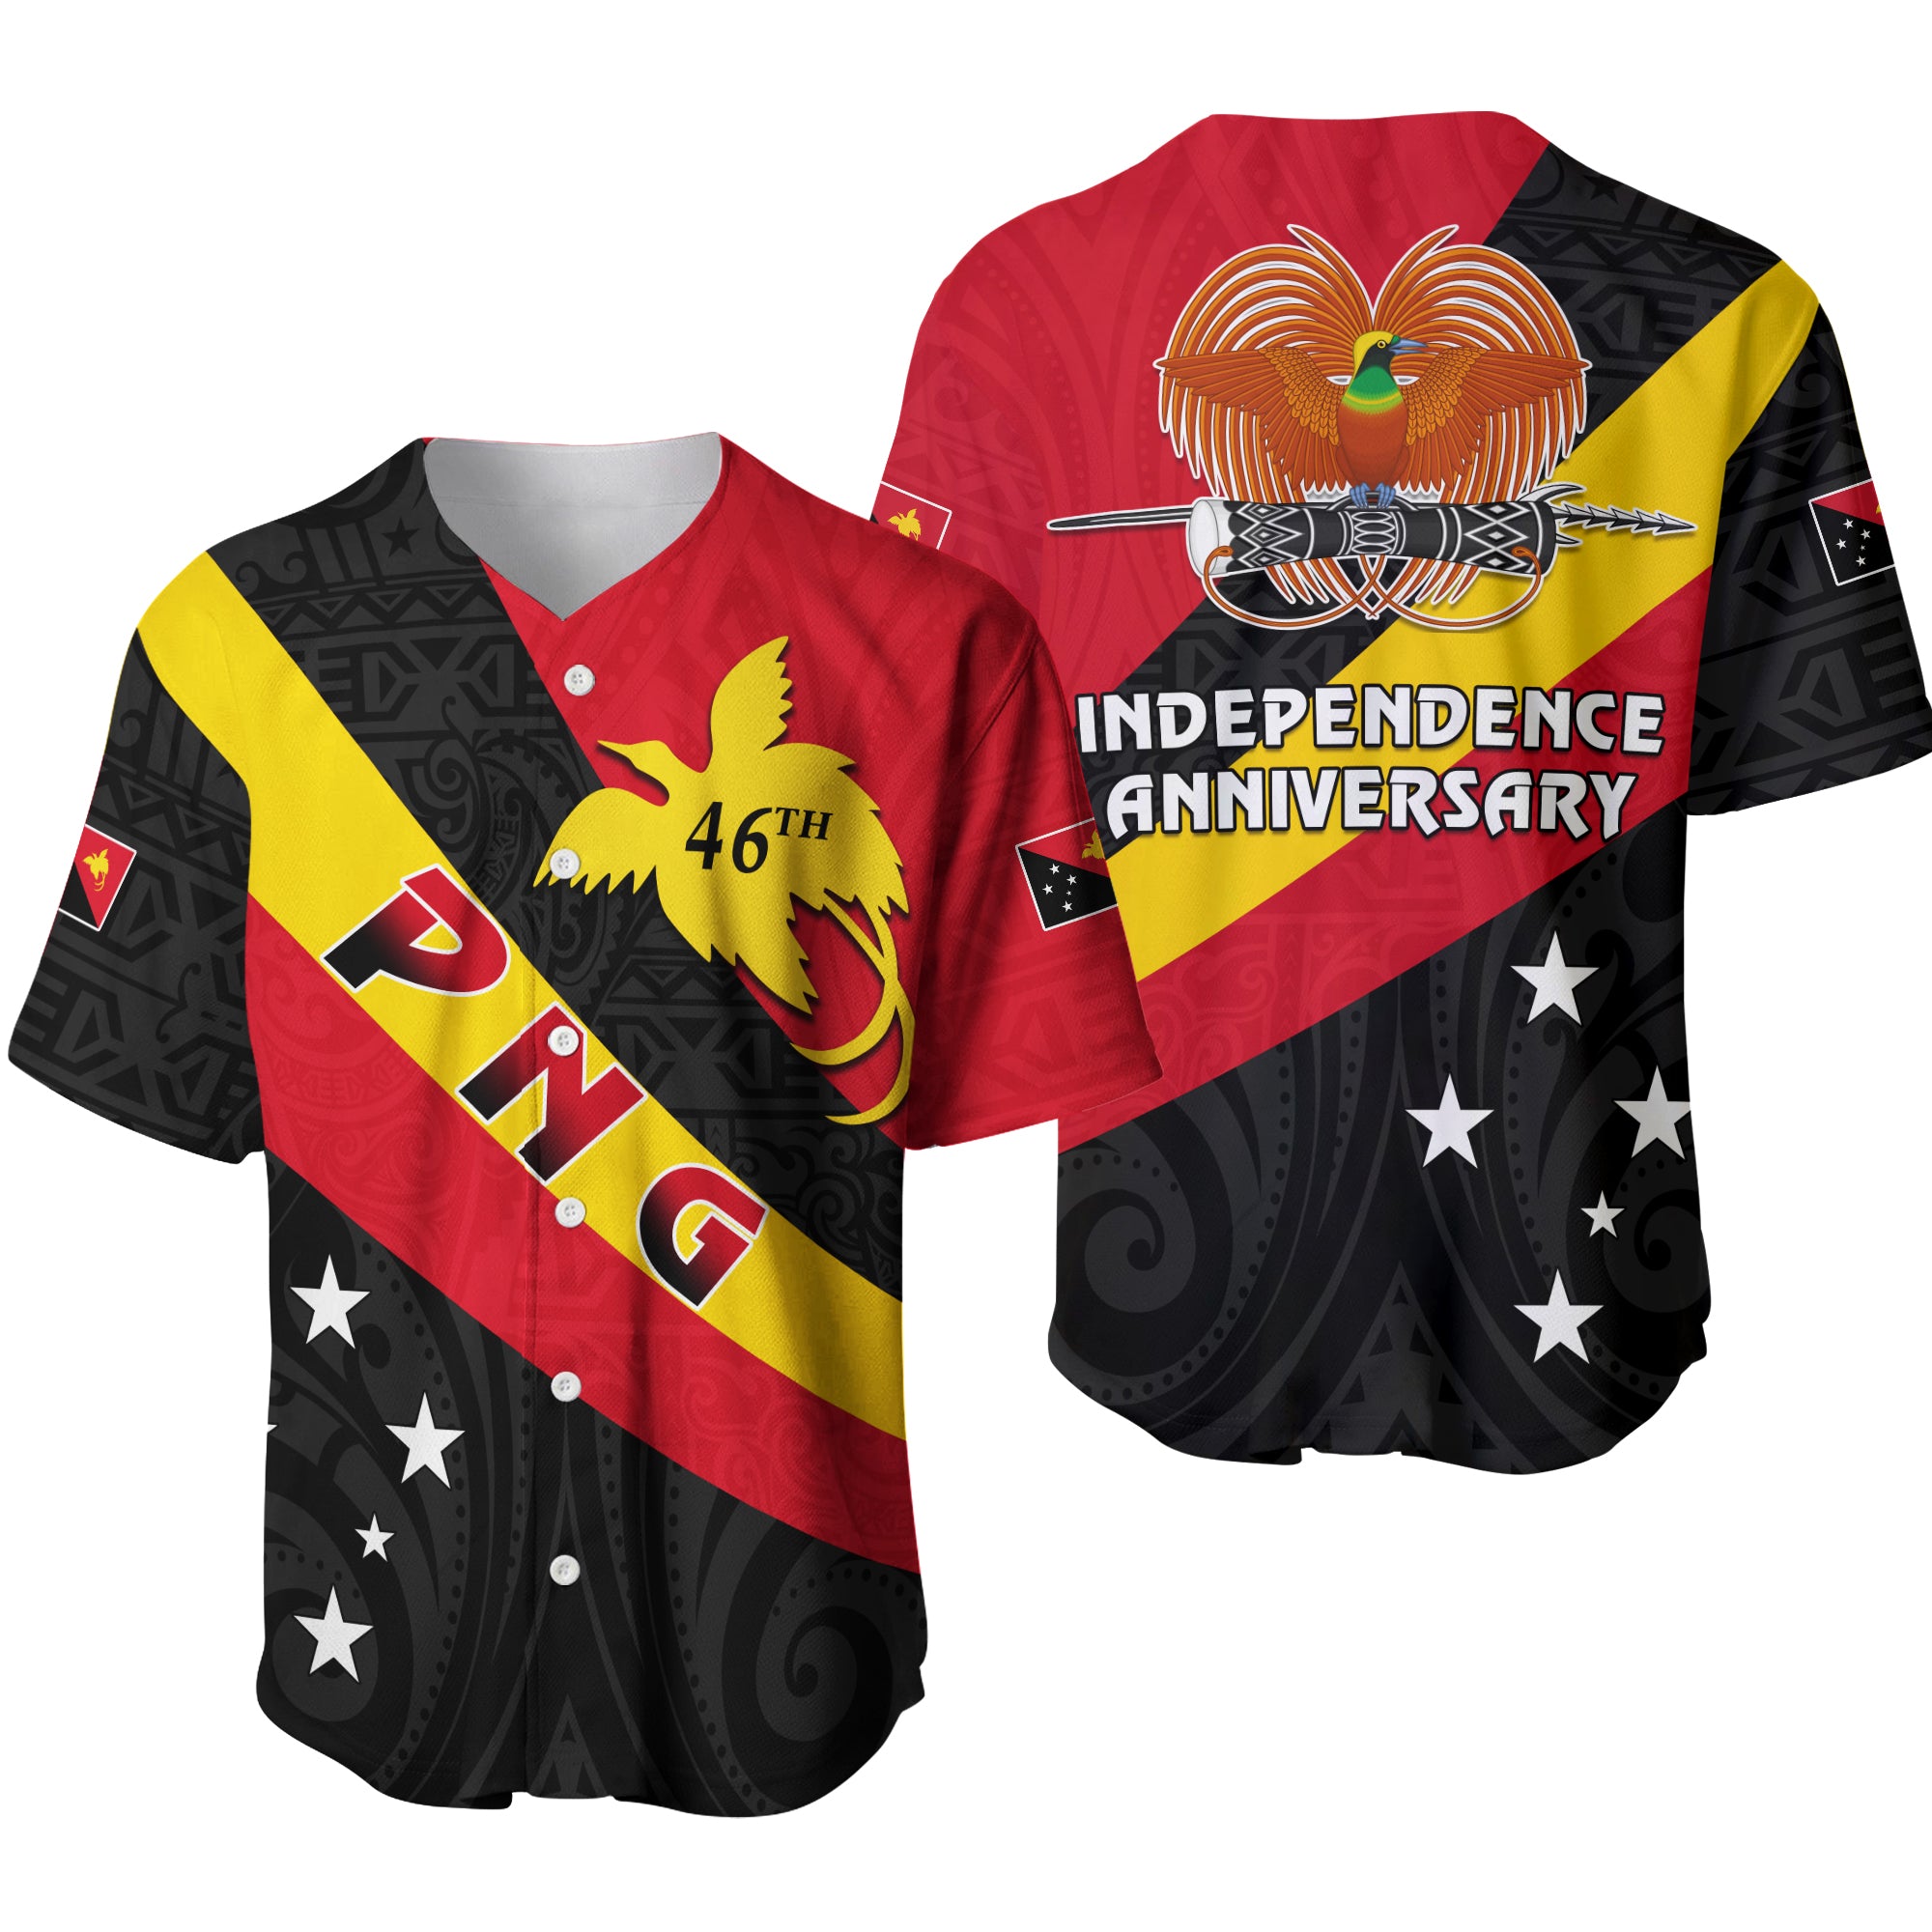 Papua New Guinea Baseball Jersey Happy Independence Day LT13 - Polynesian Pride